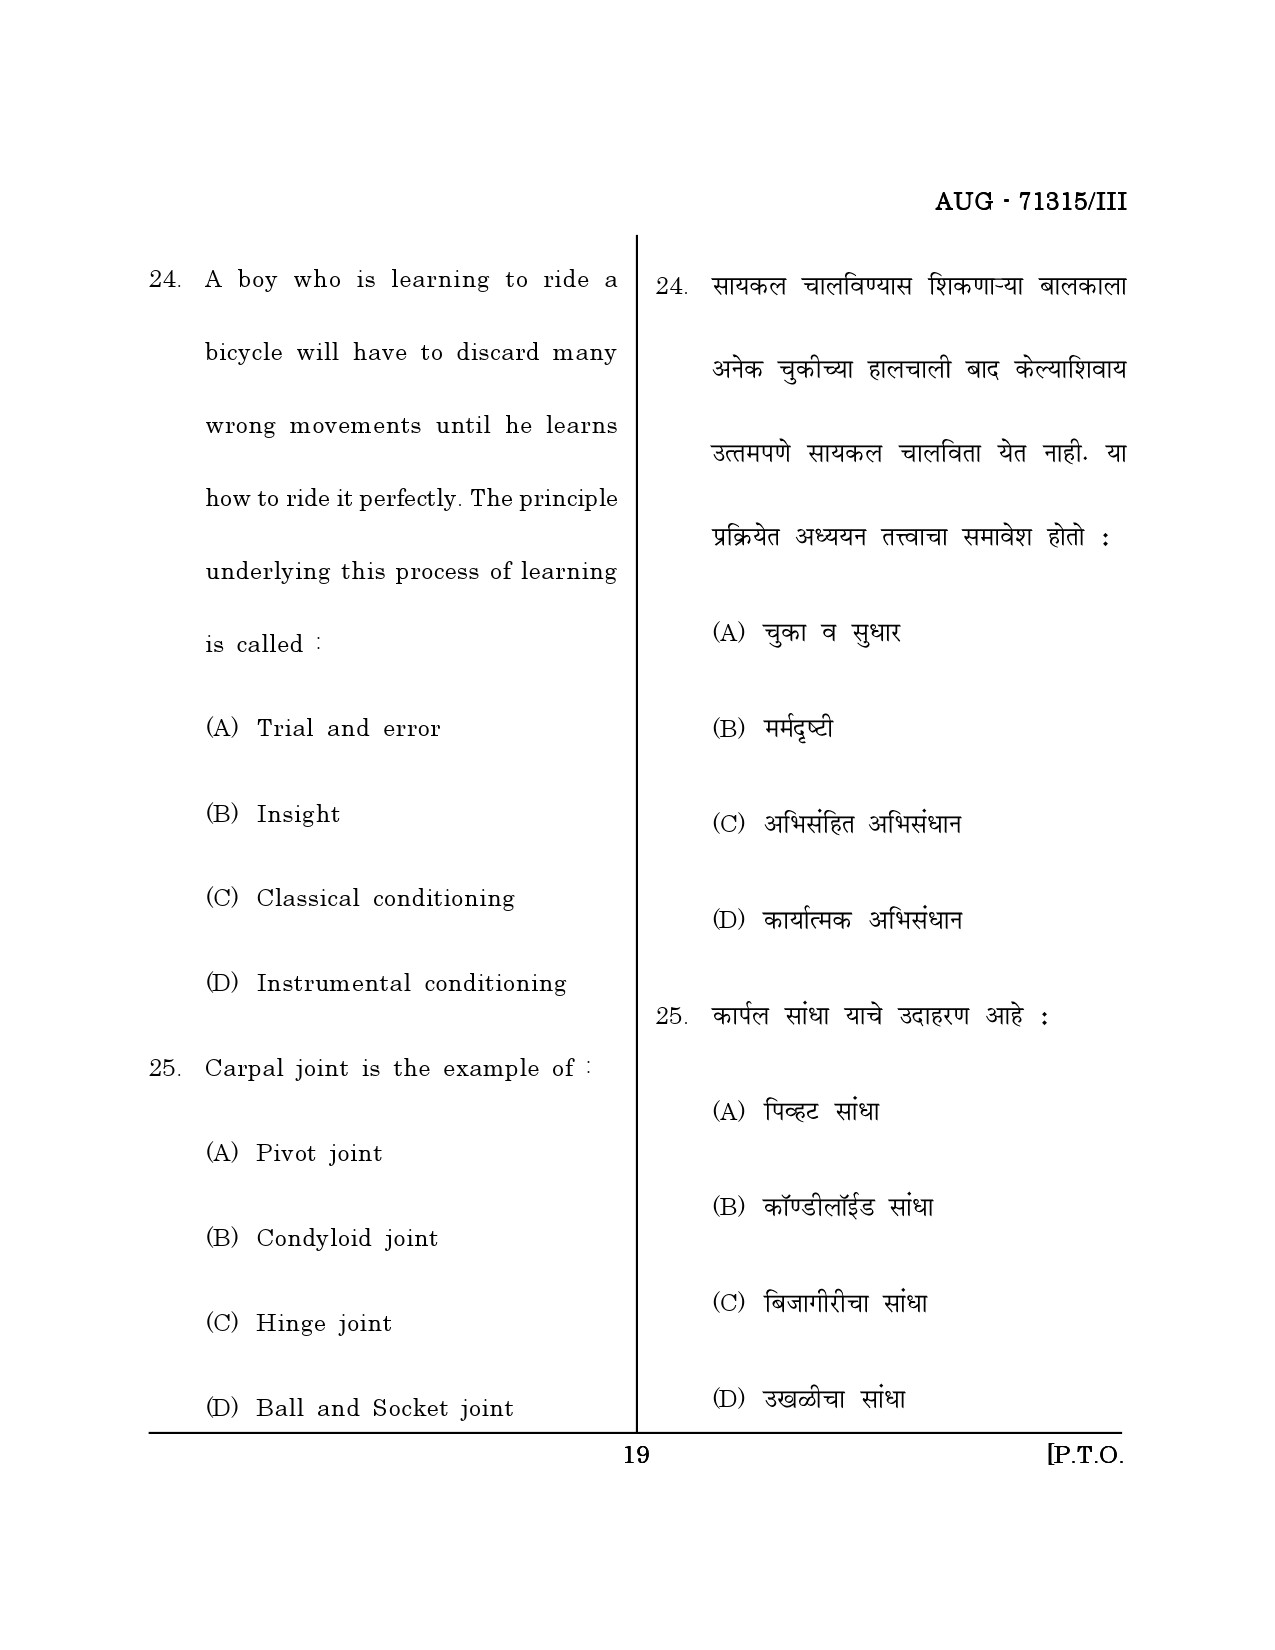 Maharashtra SET Physical Education Question Paper III August 2015 18